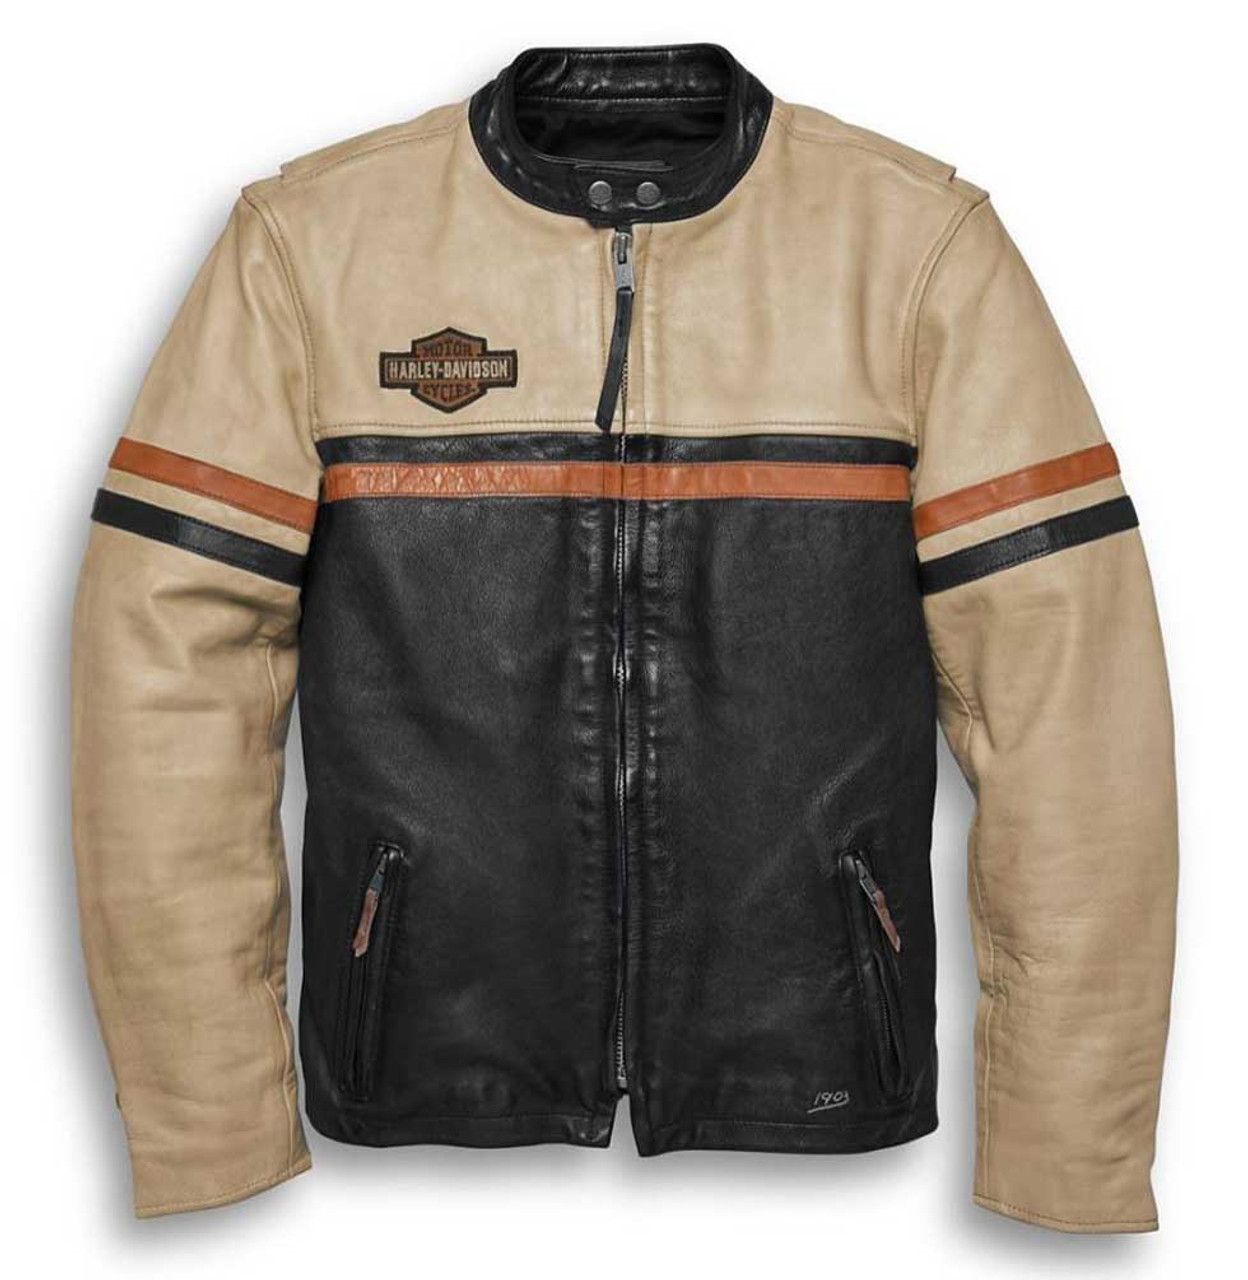 Conditioning Leather Jackets – Put This On